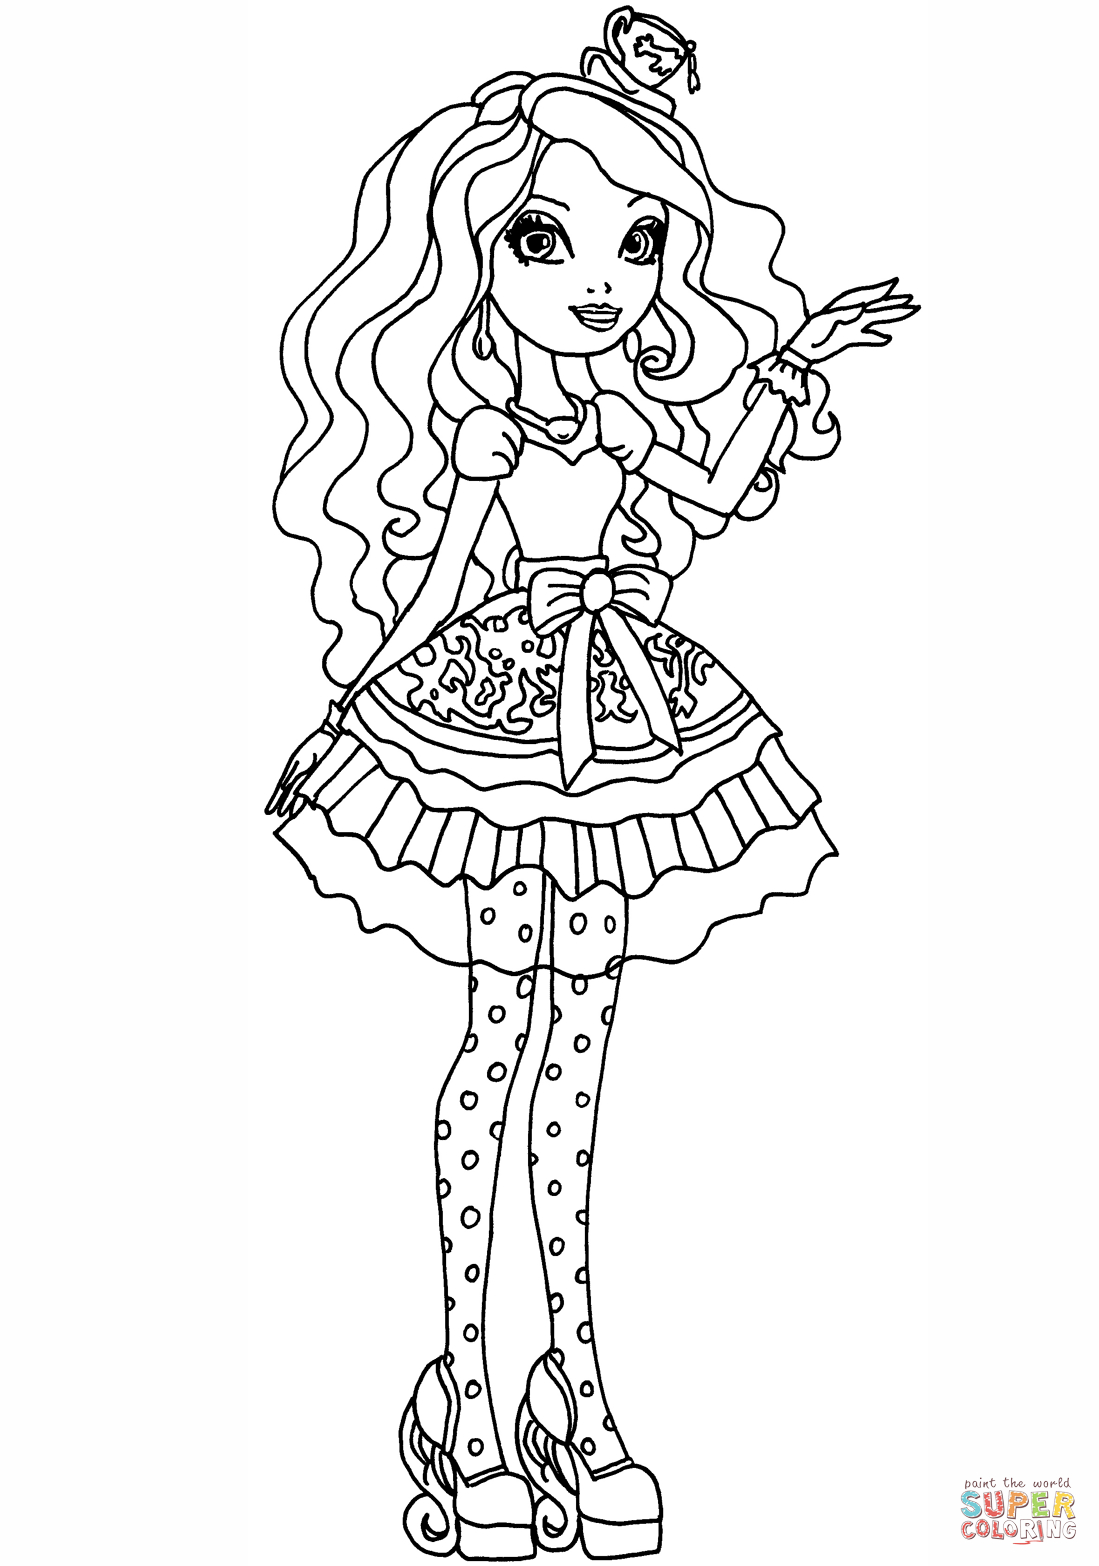 Madeline Coloring Pages Printable Ever After High Madeline Hatter Coloring Page Free Printable